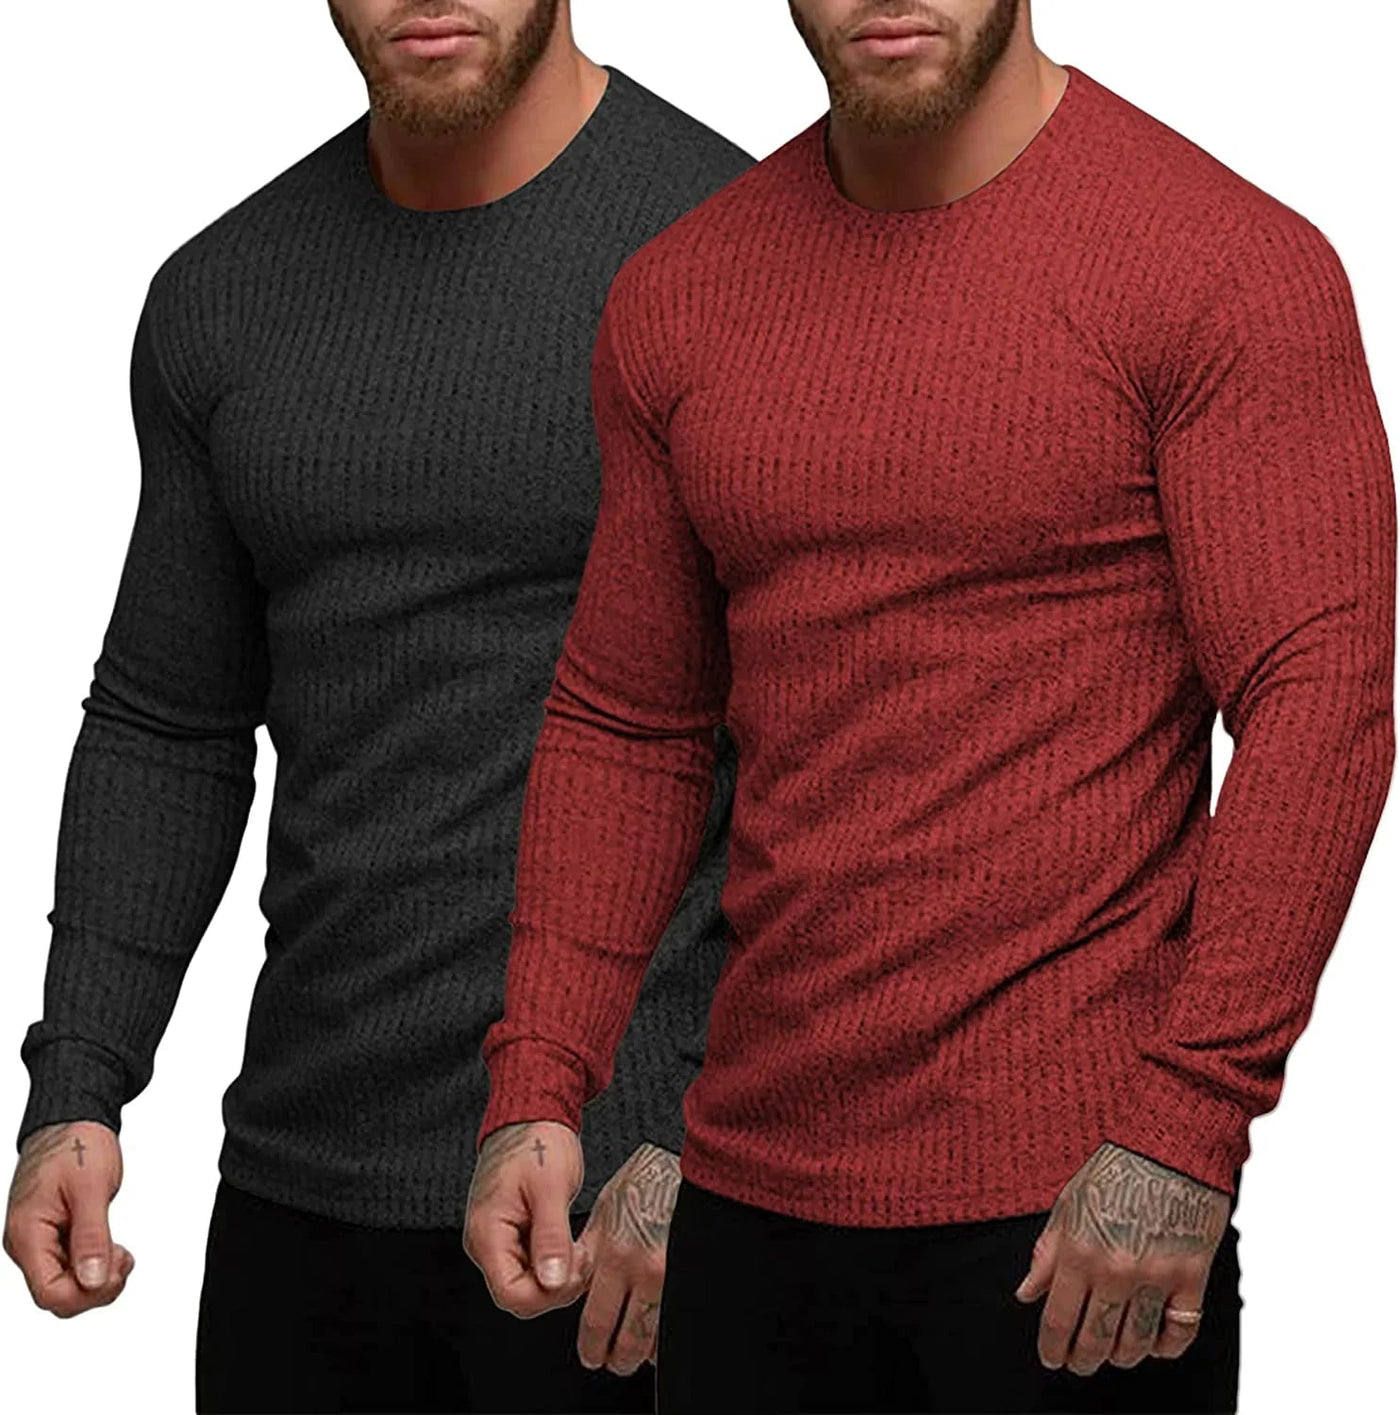 2-Pack Stretch Gym Bodybuilding T-Shirt (US Only) T-Shirt COOFANDY Store Black/Red S 